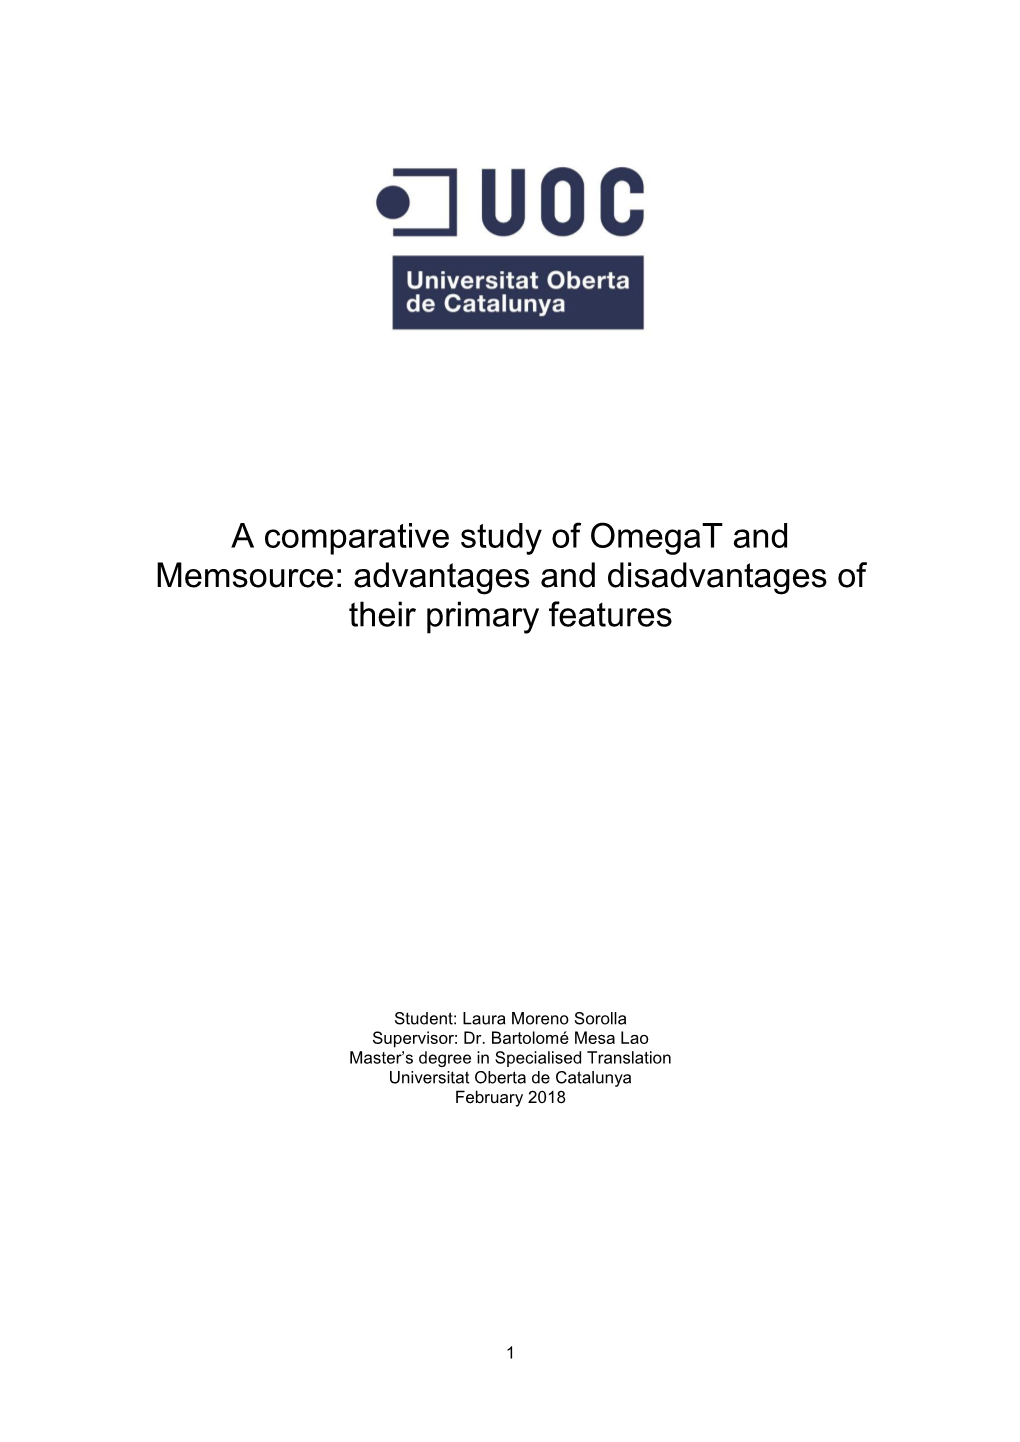 A Comparative Study of Omegat and Memsource: Advantages and Disadvantages of Their Primary Features